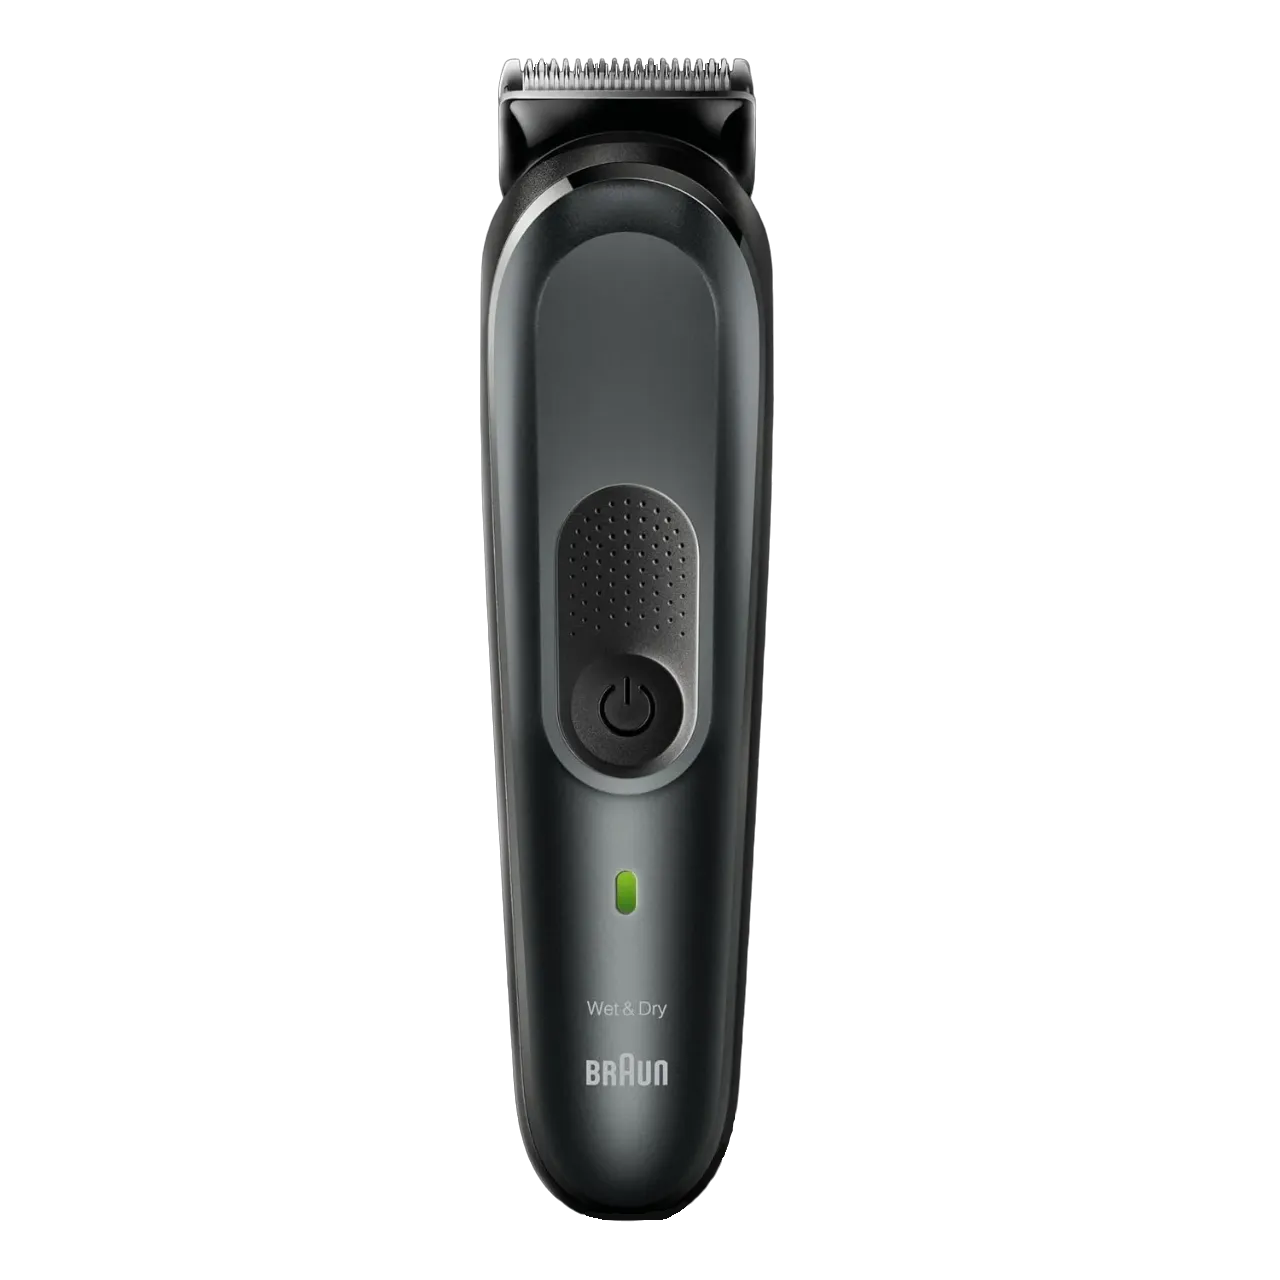 Braun All-In-One Trimmer 7 Mgk7221, 10-In-1 Beard Trimmer For Men, Hair Clipper, For Face, Hair, Body, Ear, Nose, With Autosense Technology, 8 Attachments, Black/Metallic Grey